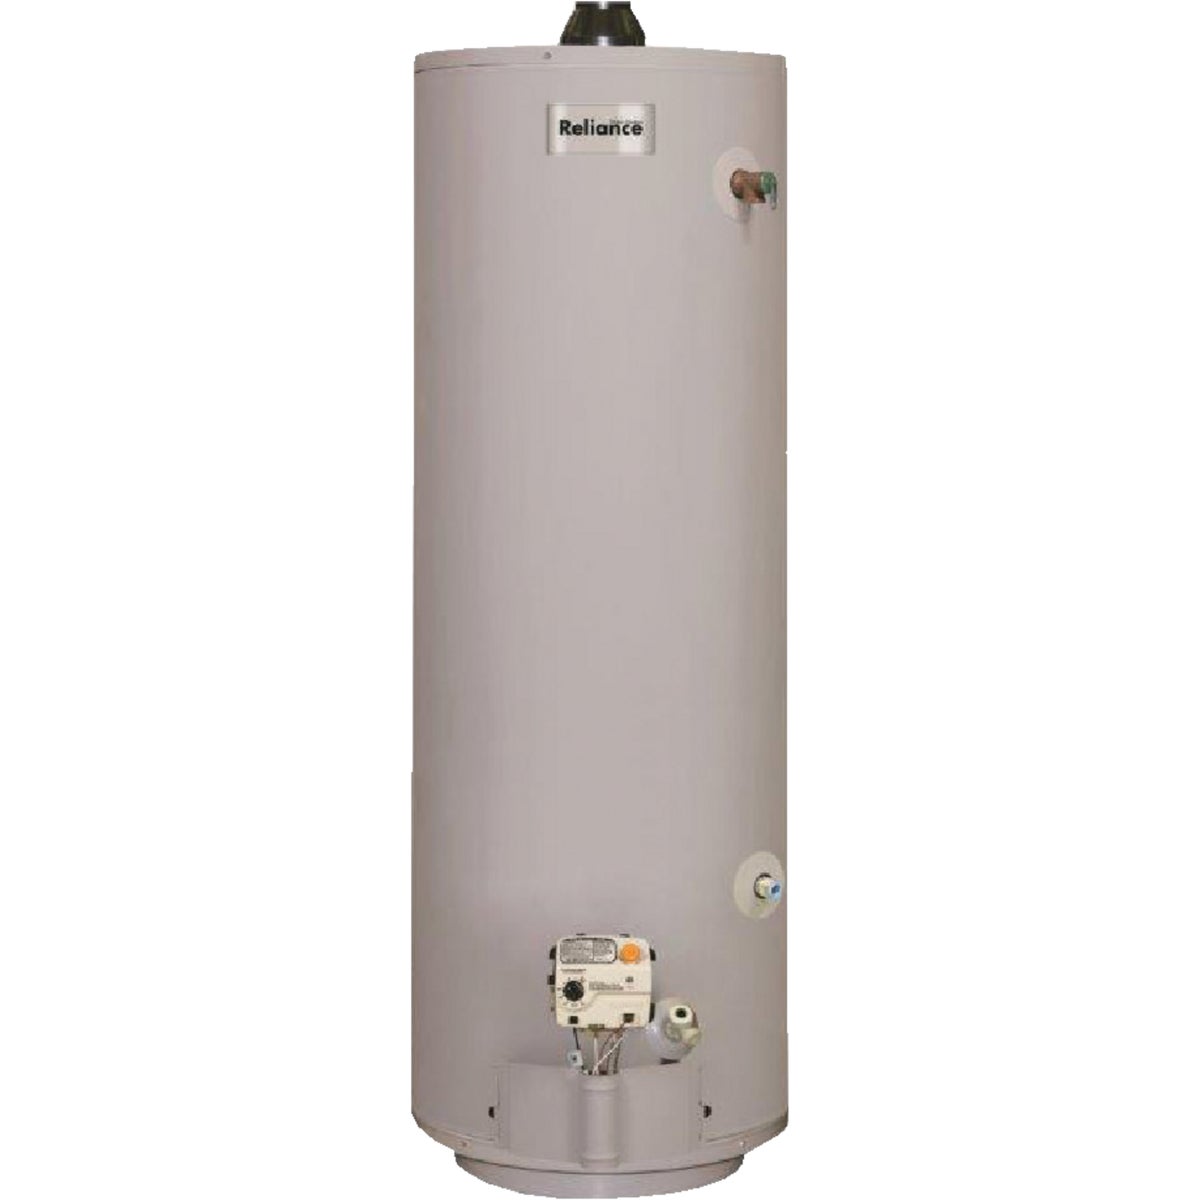 Reliance 40 Gal. Tall 6yr 32,000 BTU Direct Vent Natural Gas/Liquid Propane Water Heater for Mobile Home